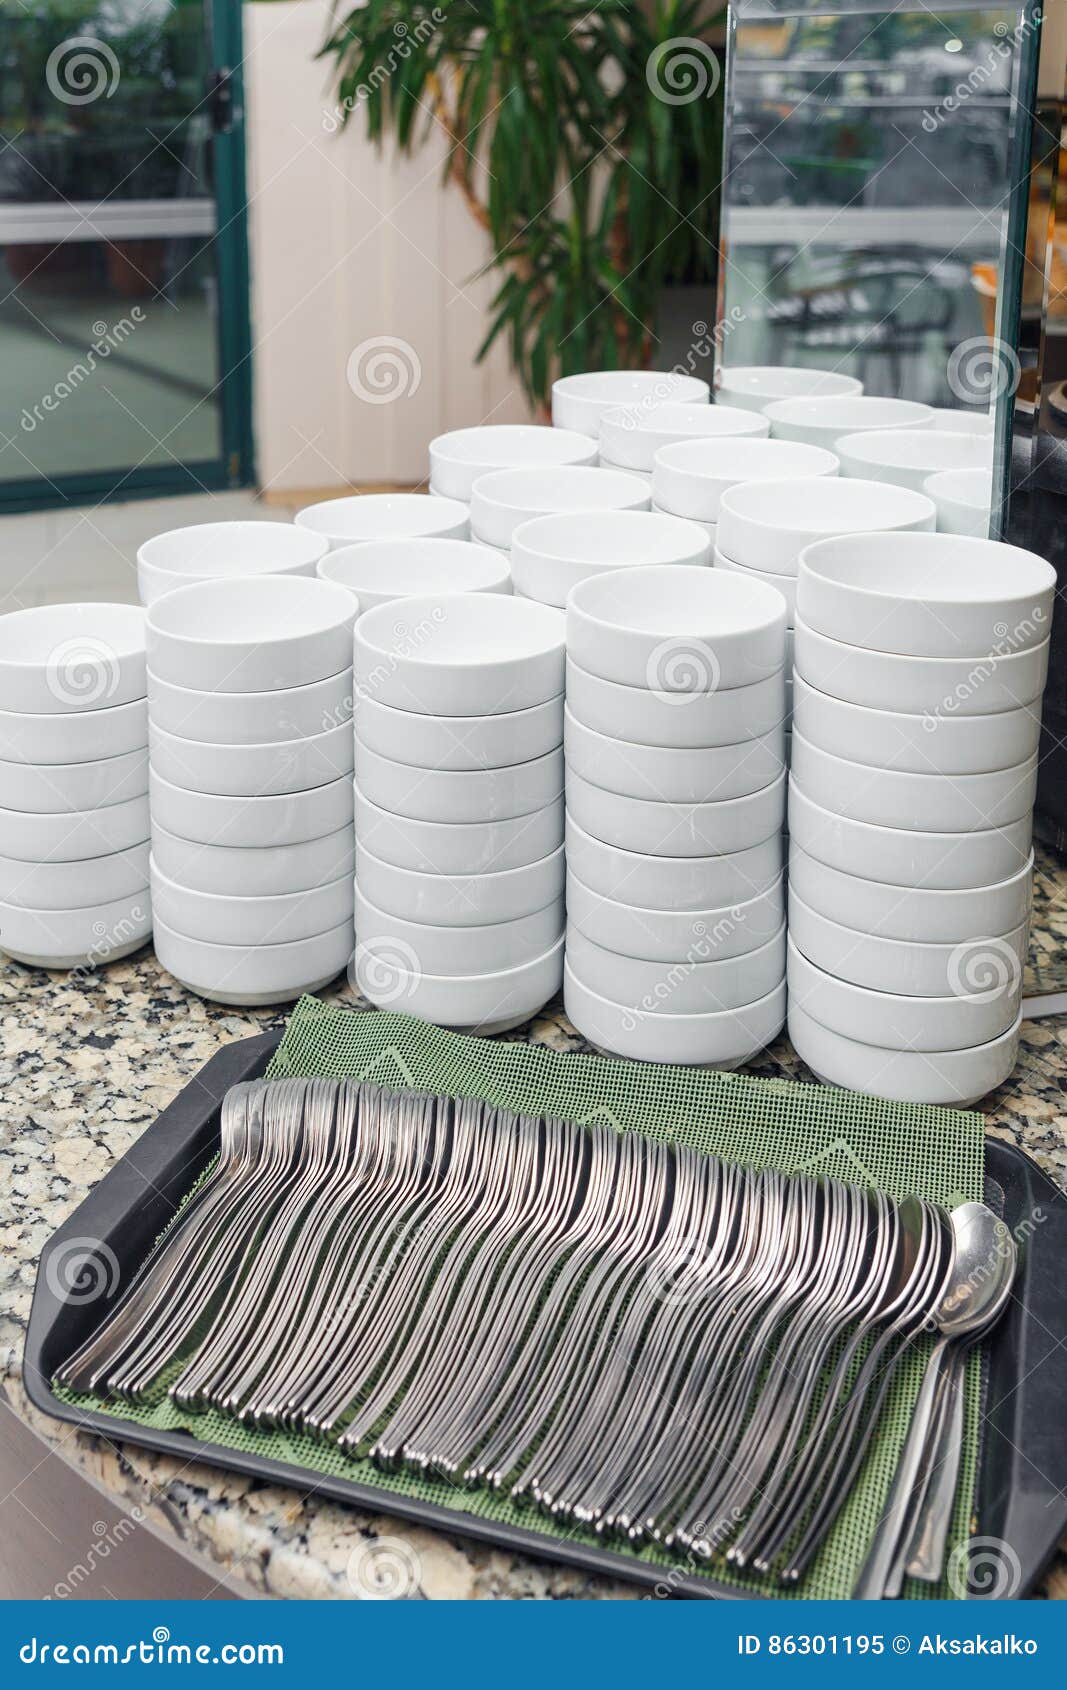 Stack of soup bowls stock image. Image of collection - 86301195